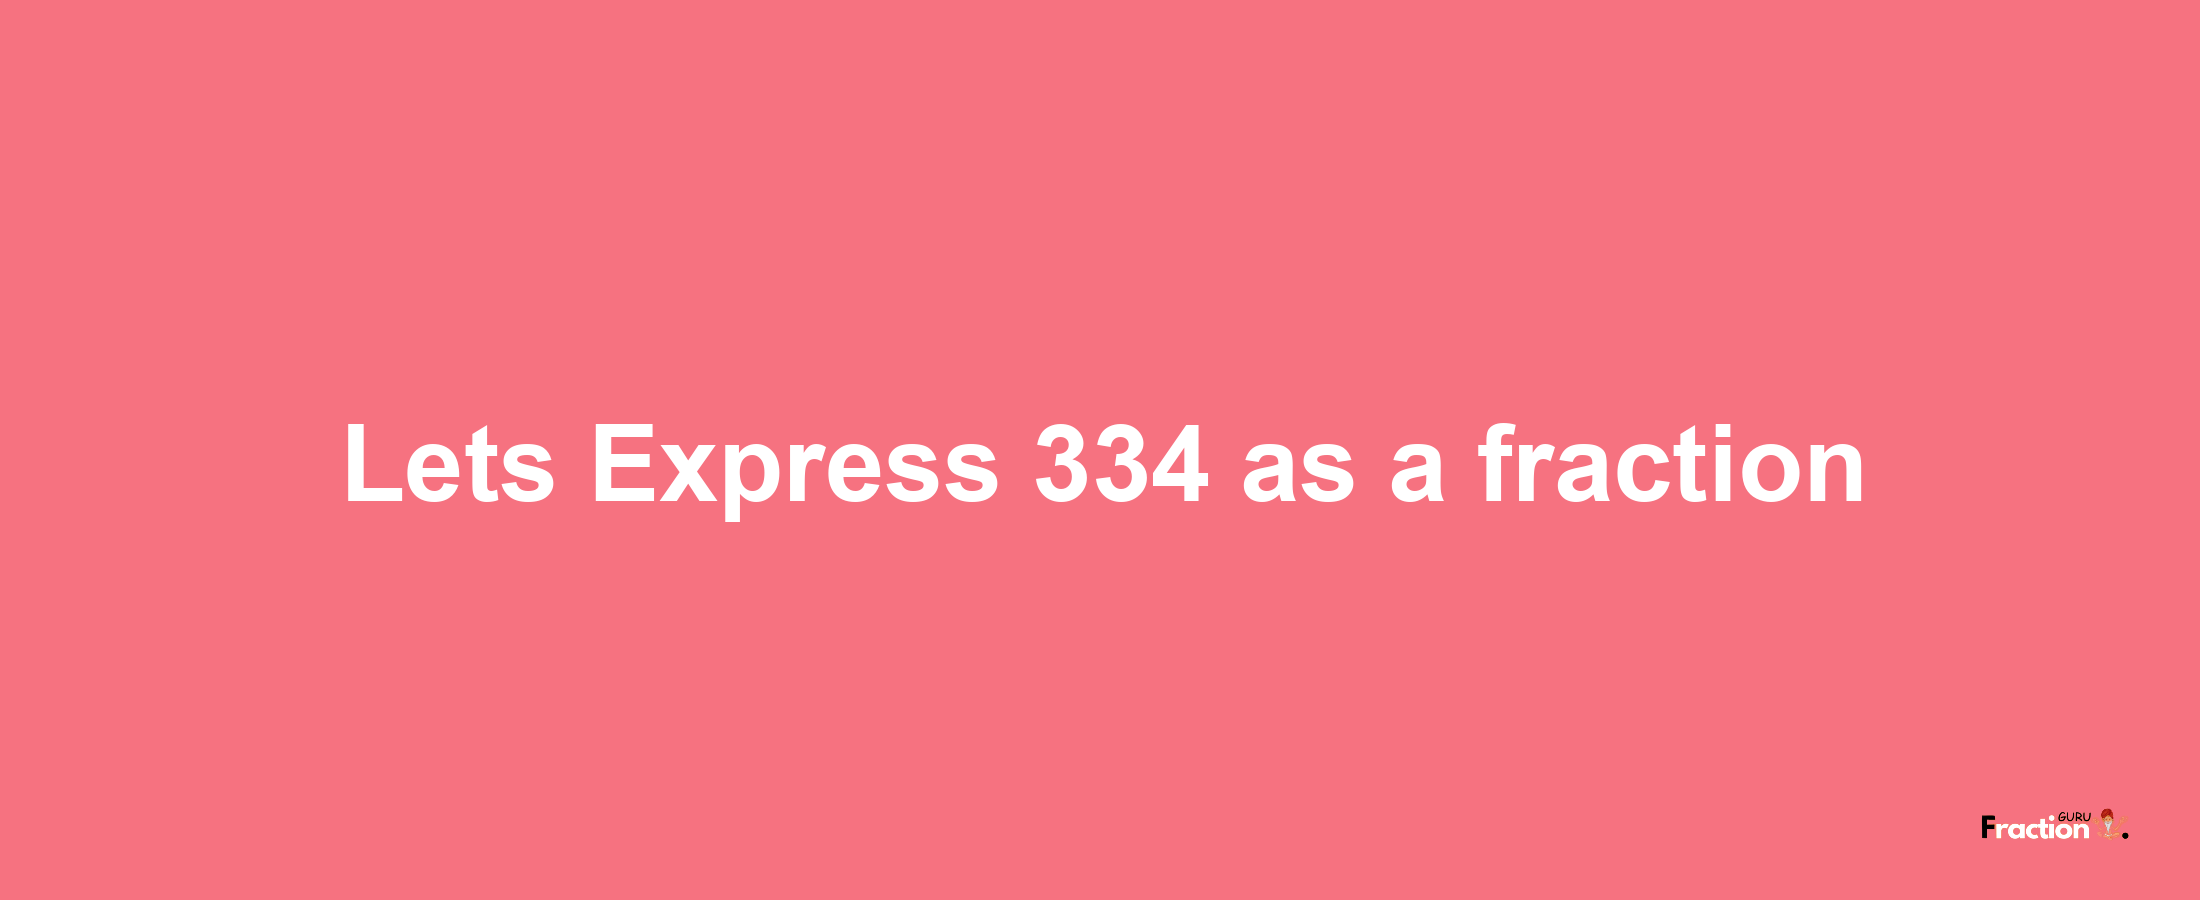 Lets Express 334 as afraction